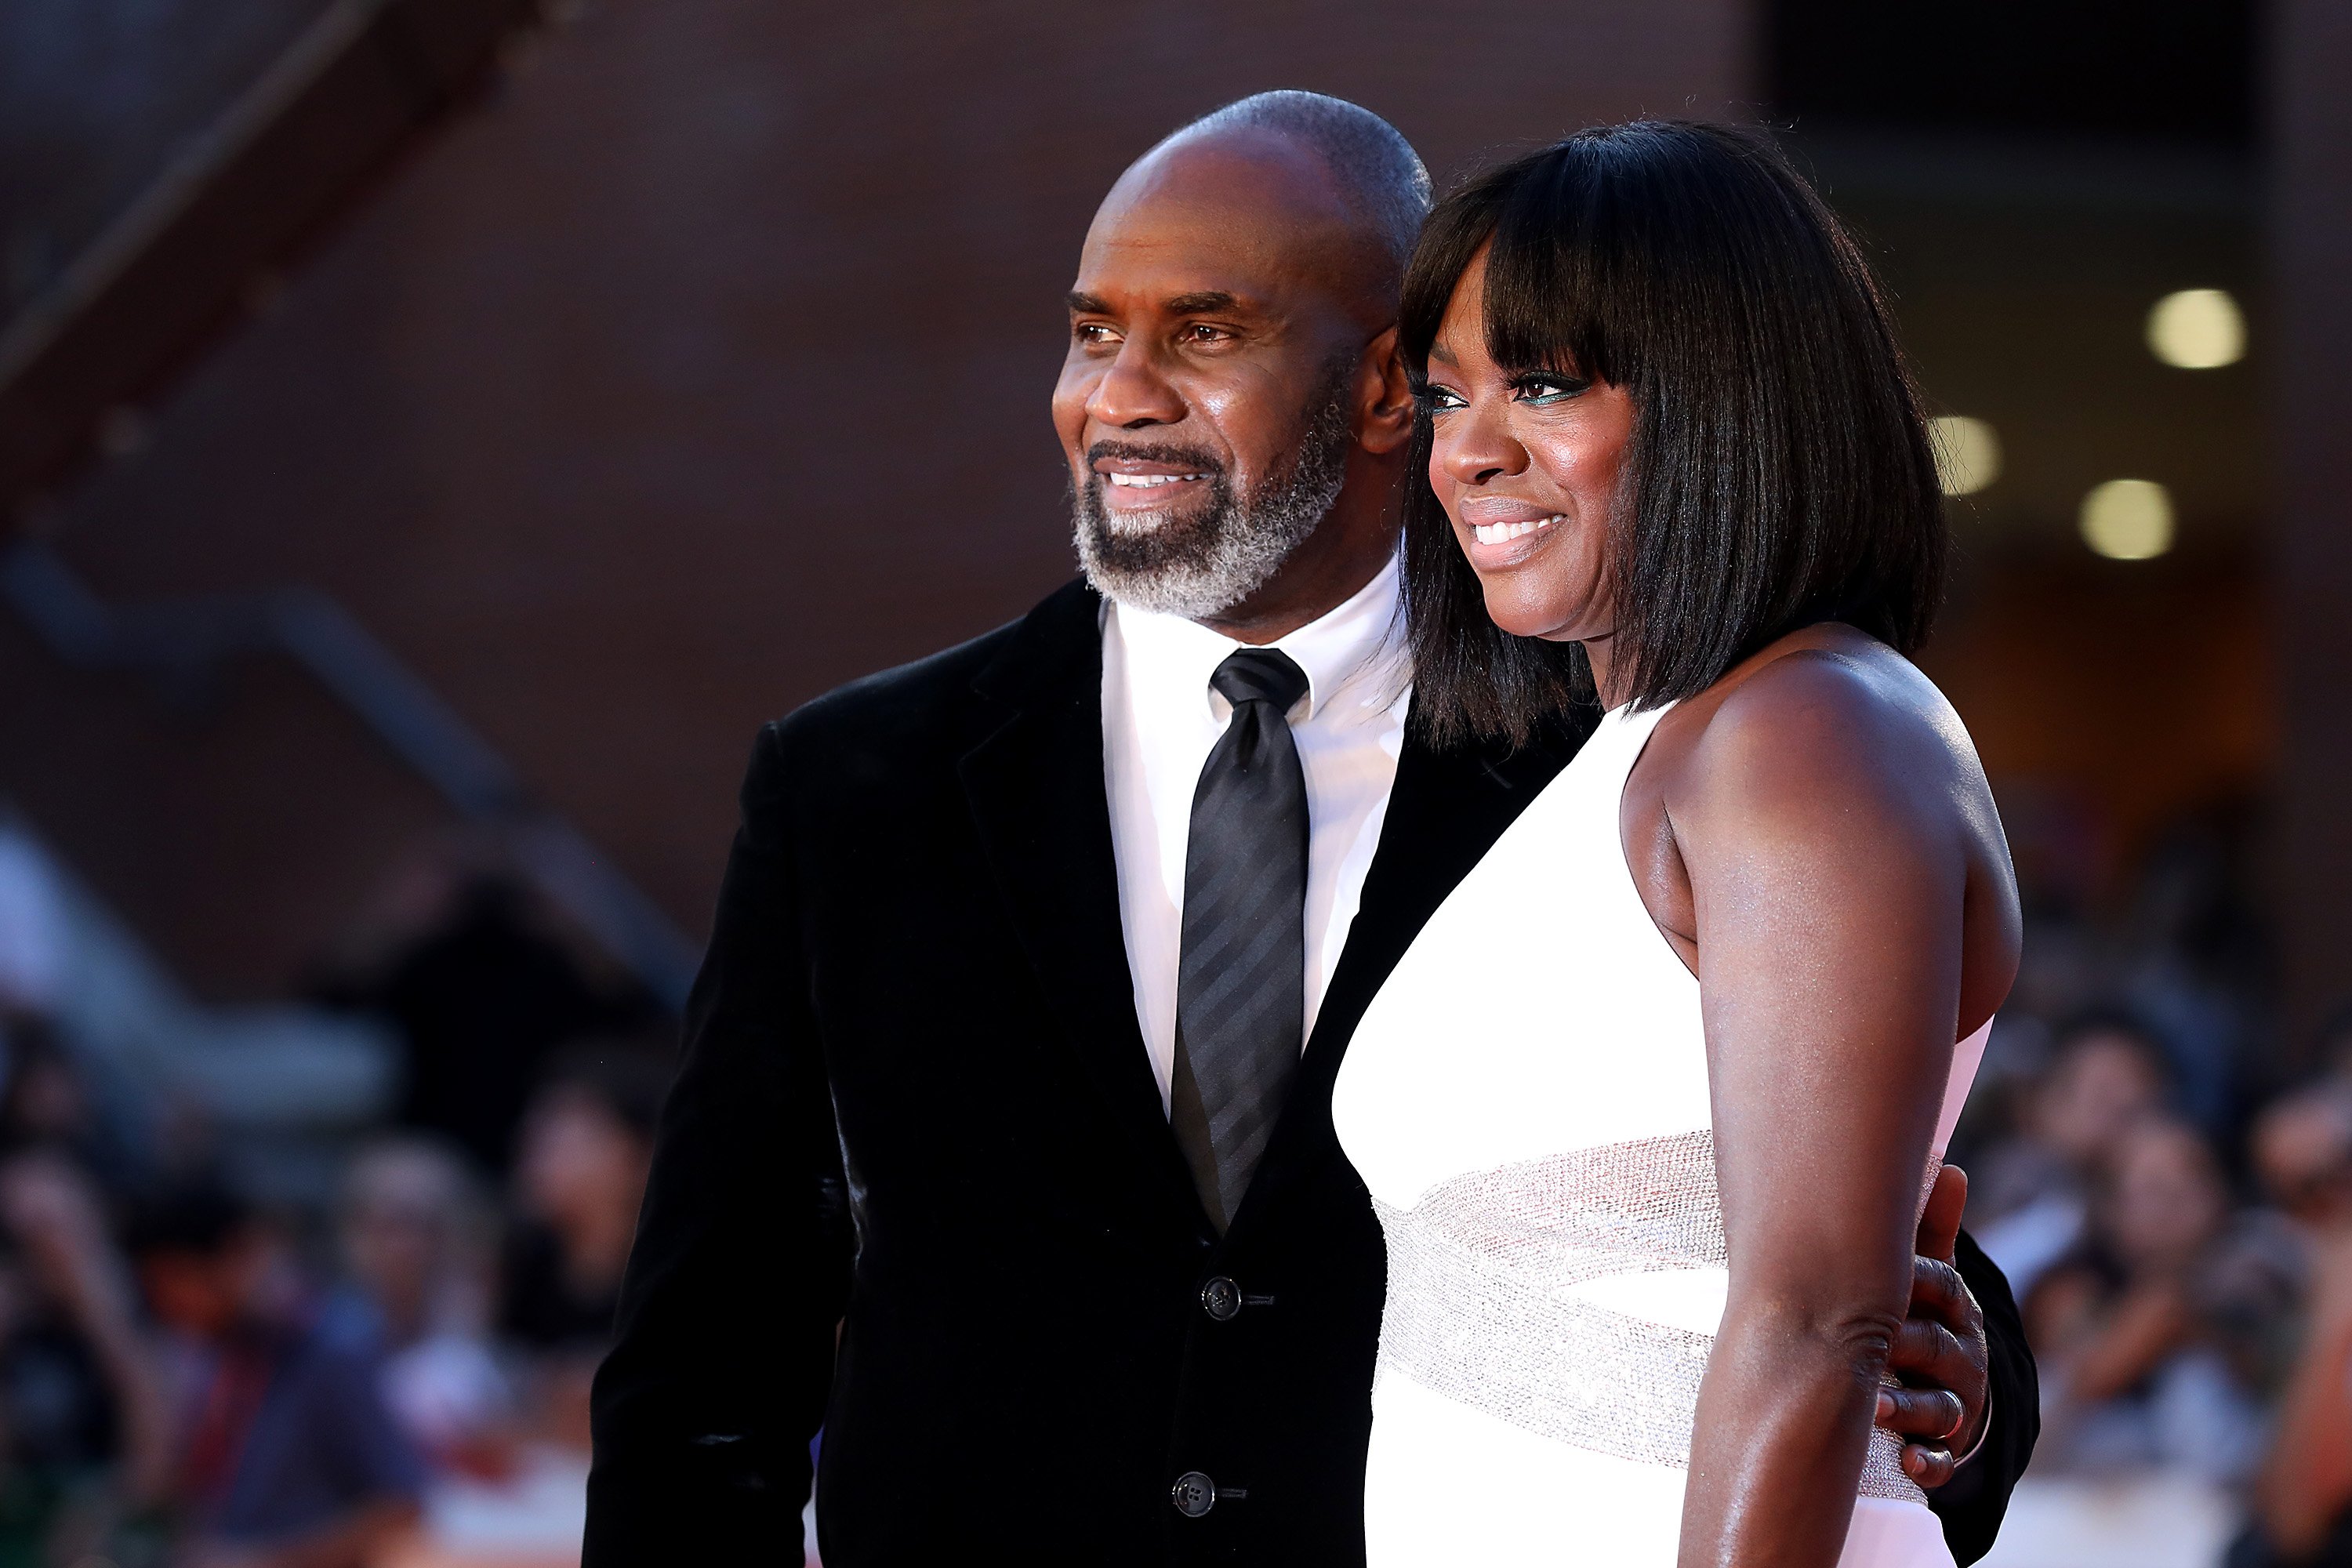 Julius Tennon and Viola Davis during the 14th Rome Film Festival on October 26, 2019, in Rome, Italy. | Source: Getty Images